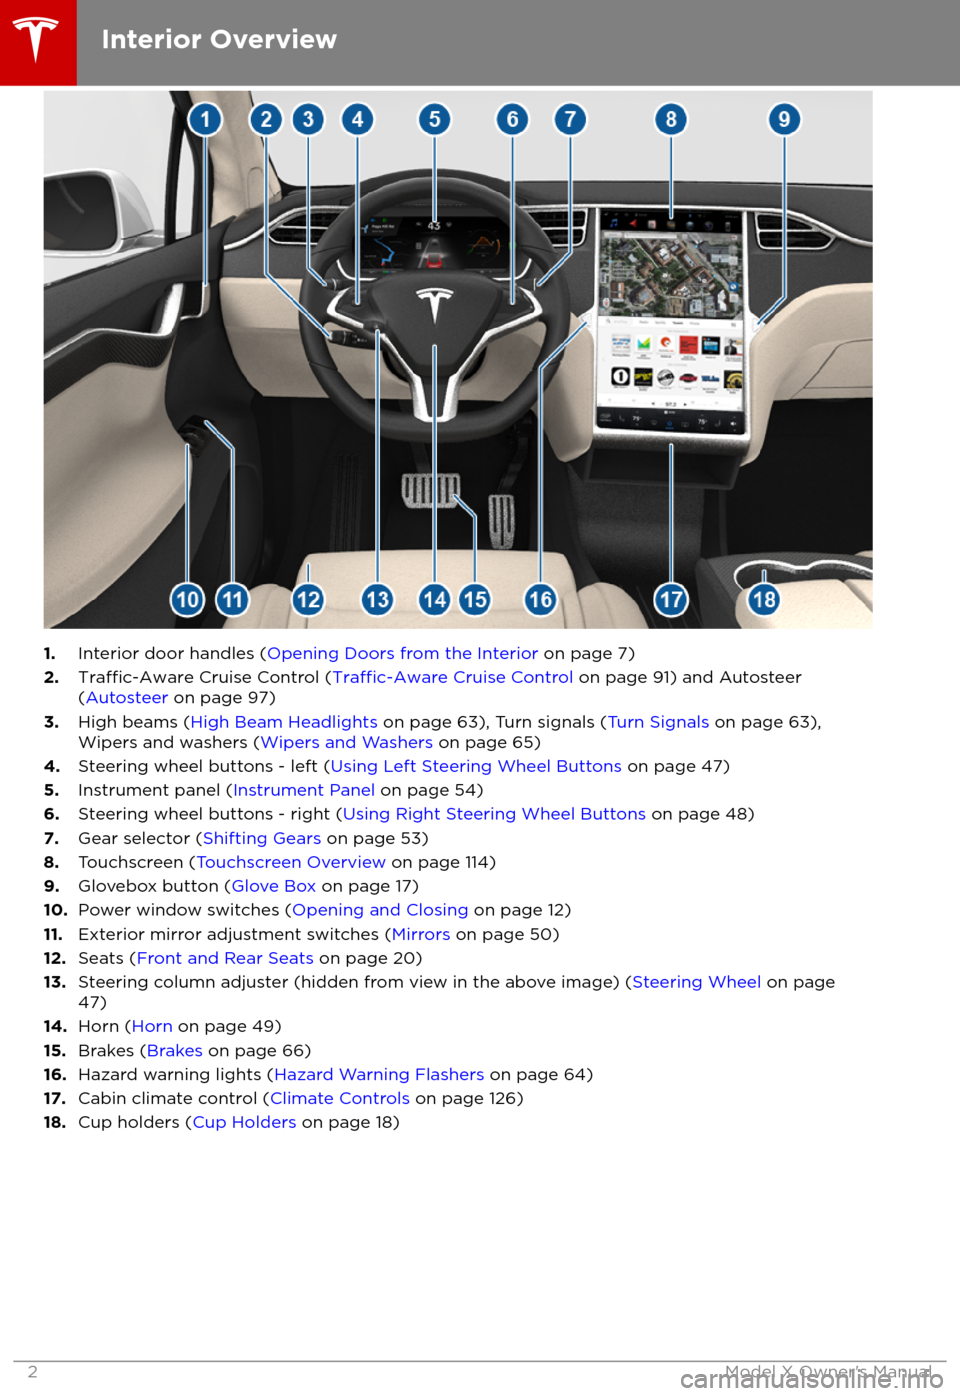 TESLA MODEL X 2018  Owners Manual  1.Interior door handles ( Opening Doors from the Interior  on page 7)
2.Traffic-Aware Cruise Control (Traffic-Aware Cruise Control  on page 91) and Autosteer
( Autosteer  on page 97)
3. High beams ( H